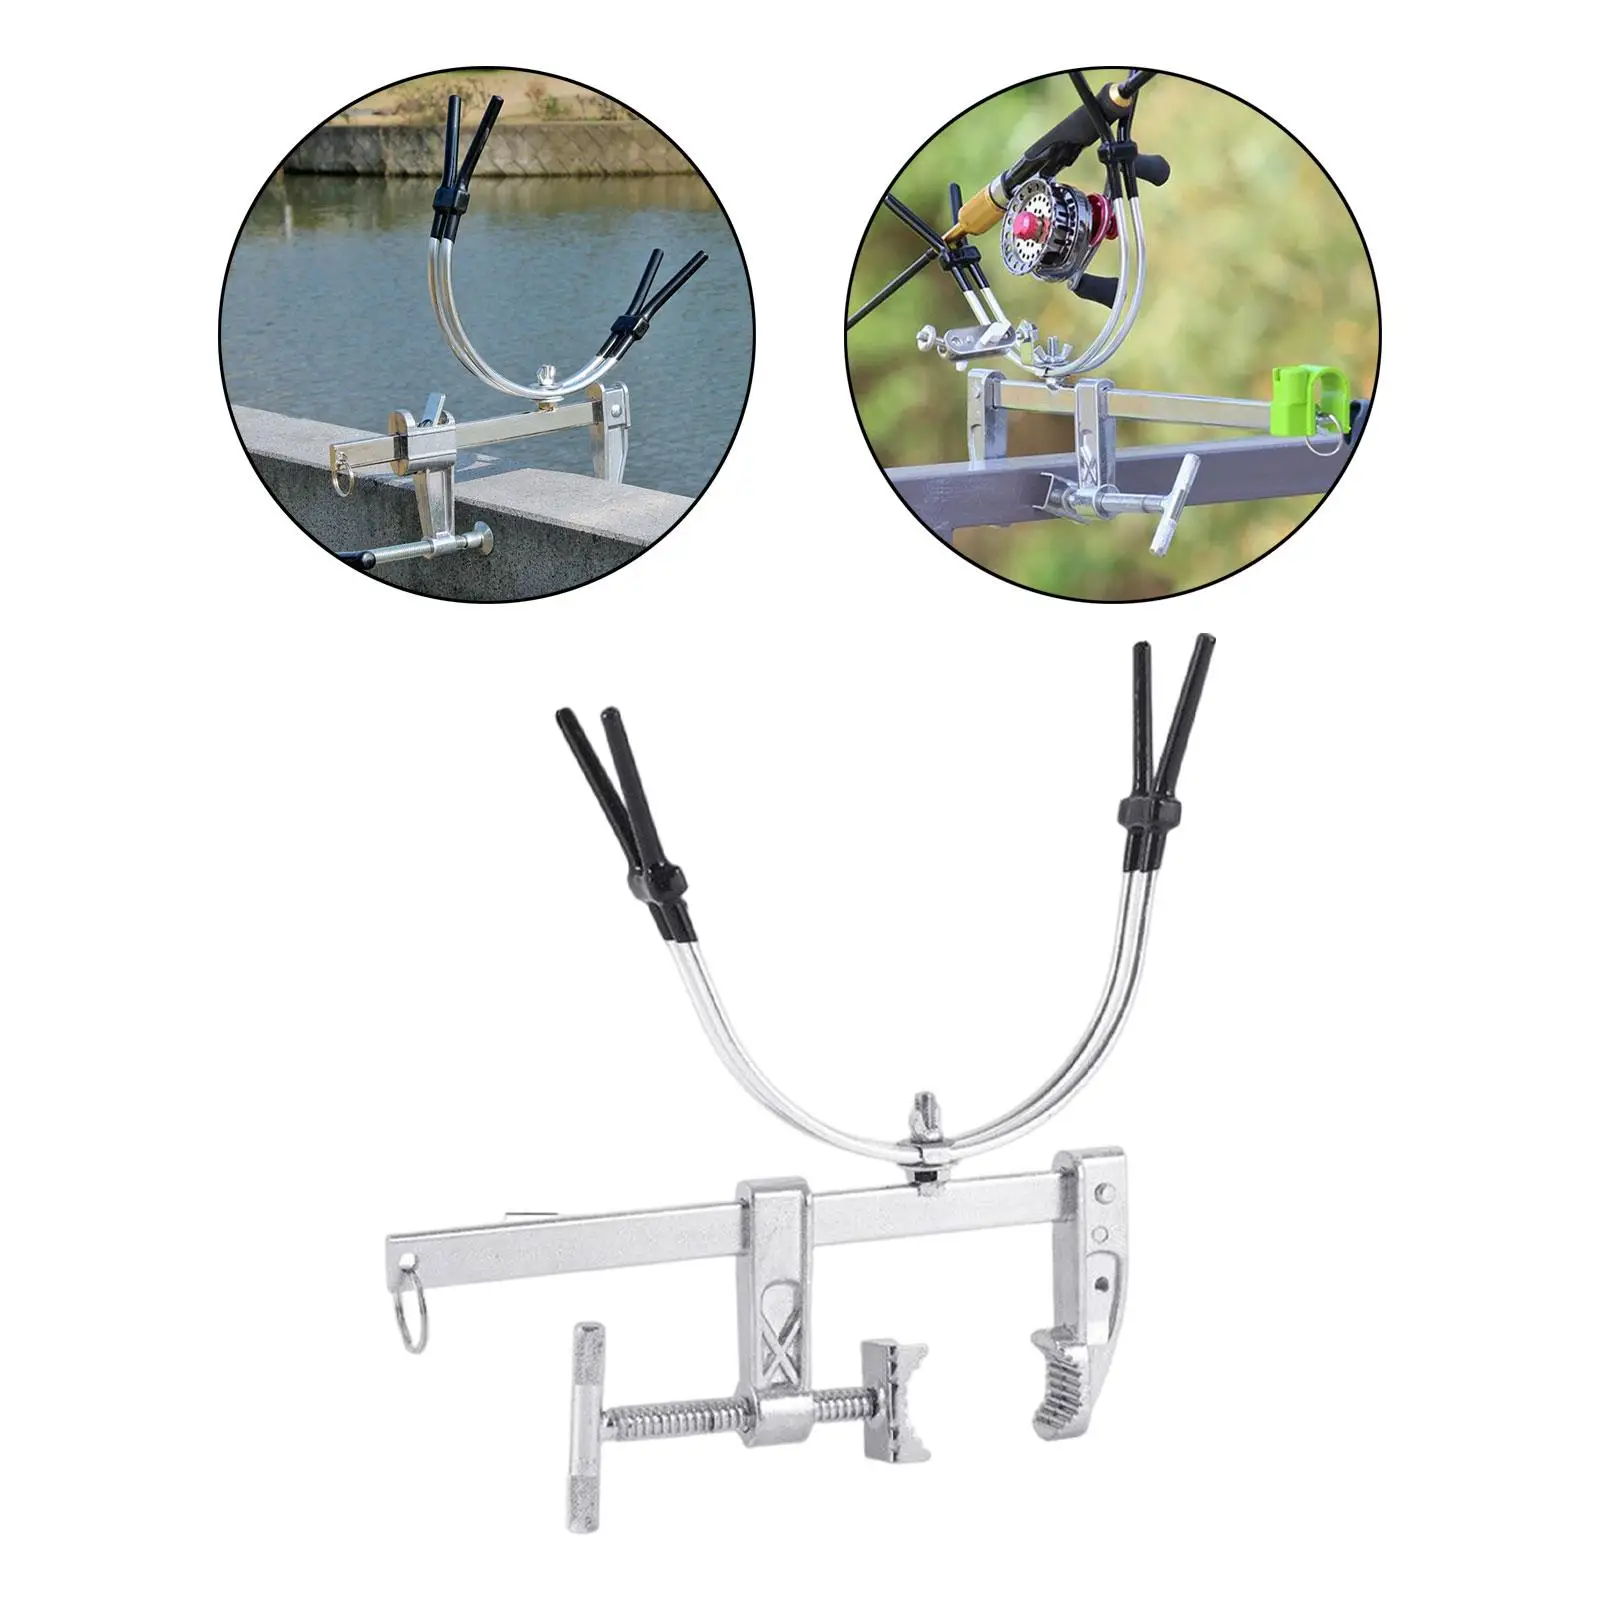 Fishing Rod Bracket Support Stand Fishing Gear Pole Holder for Fishing Accessories